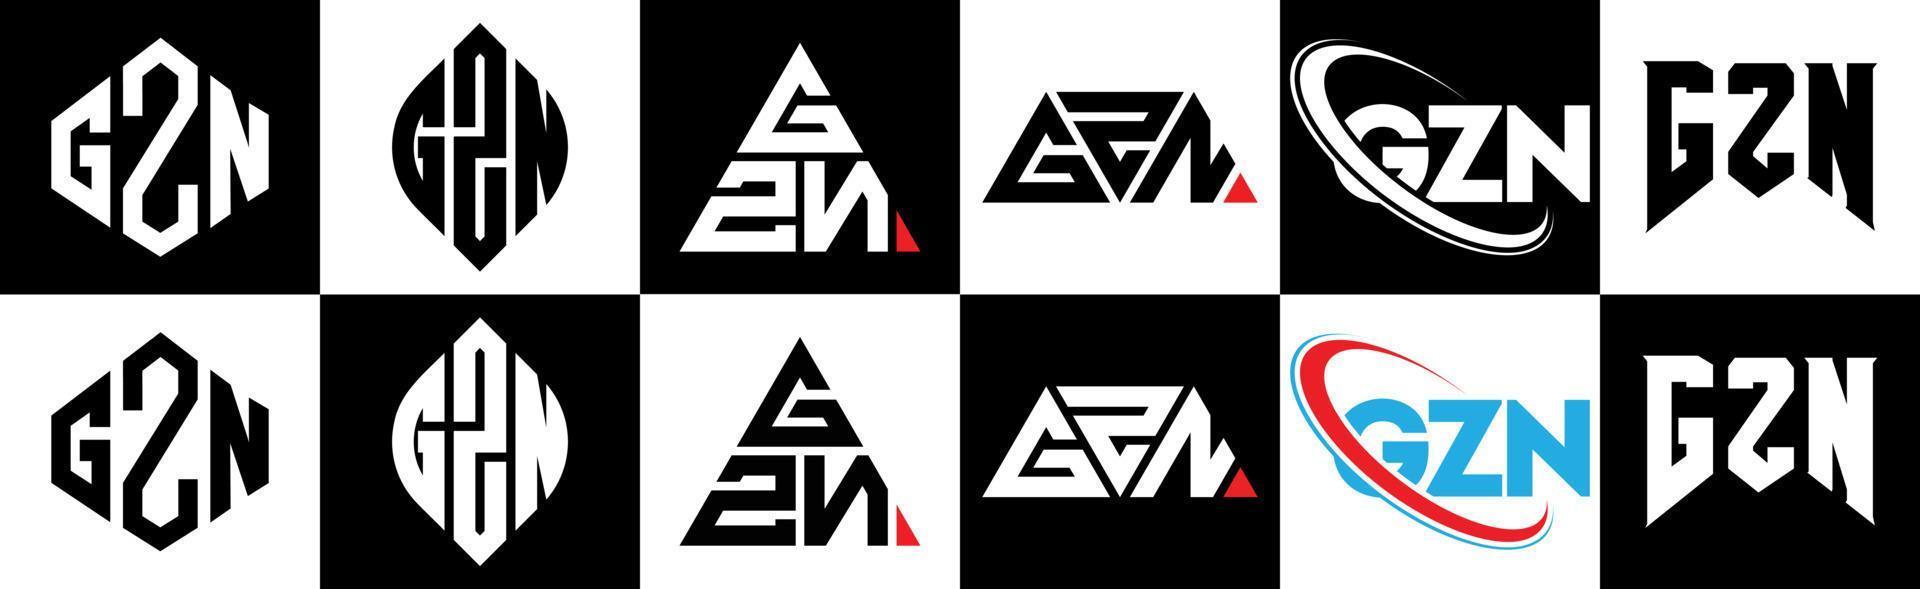 GZN letter logo design in six style. GZN polygon, circle, triangle, hexagon, flat and simple style with black and white color variation letter logo set in one artboard. GZN minimalist and classic logo vector